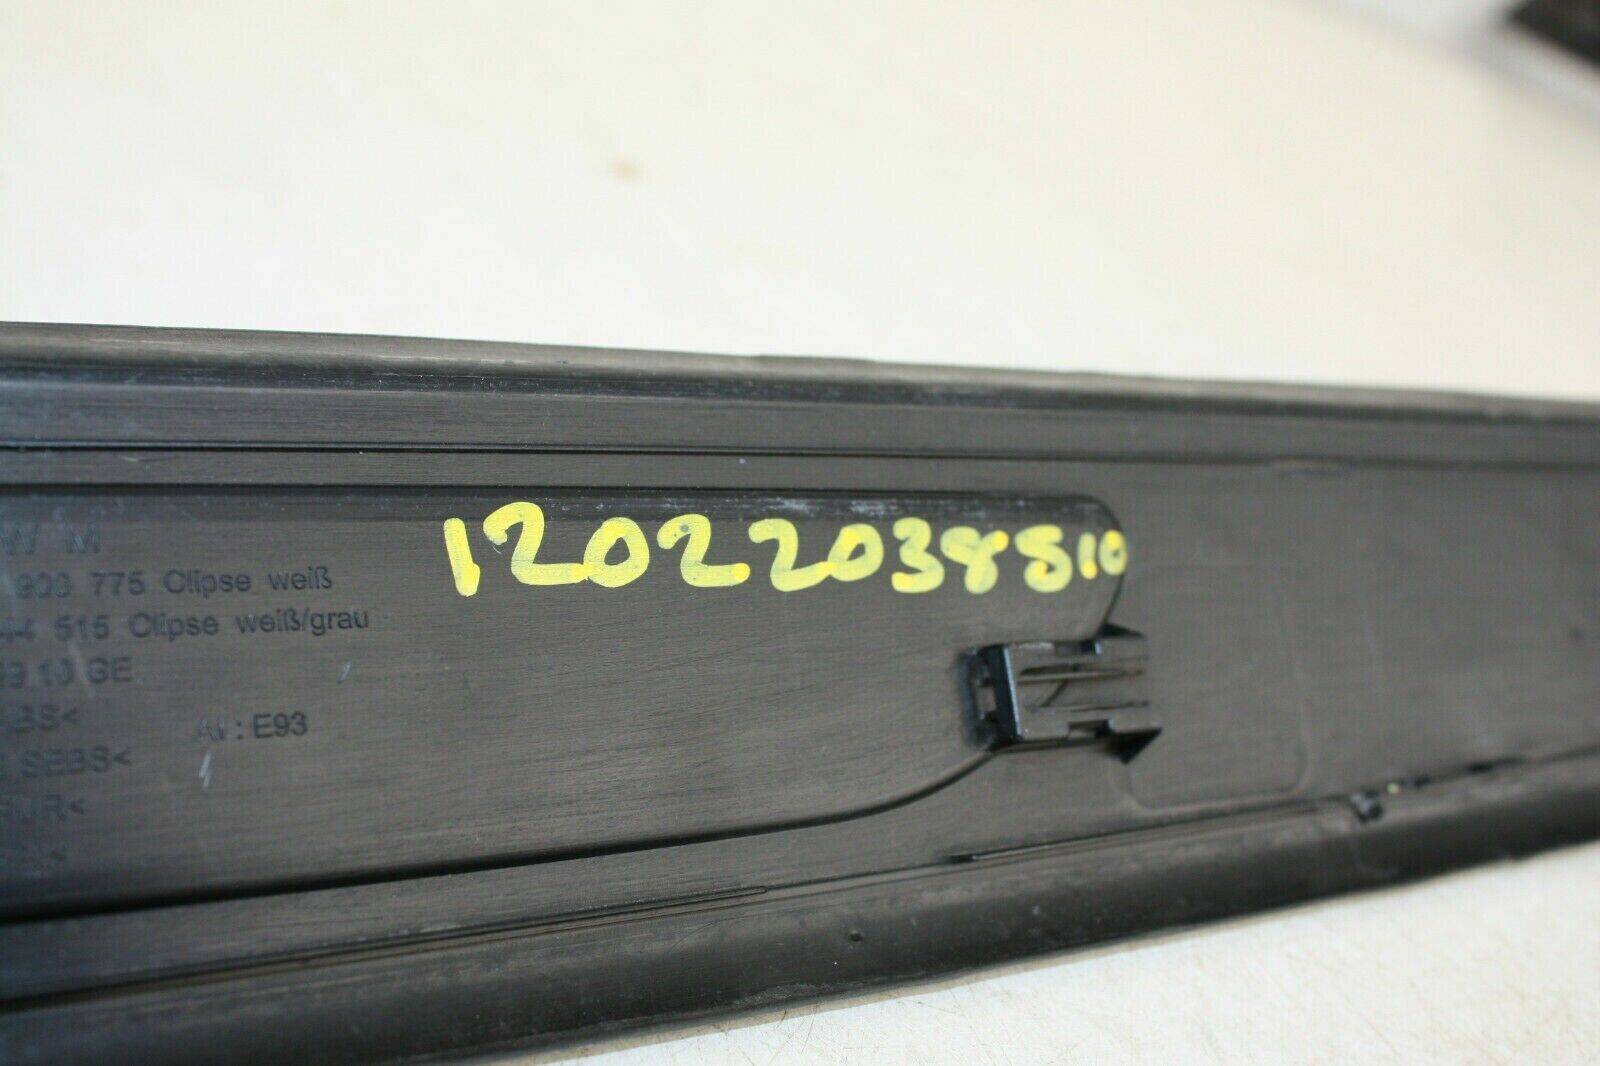 BMW-3-SERIES-FRONT-LEFT-DOOR-ENTRANCE-SILL-STRIP-2006-TO-2010-175431720438-11